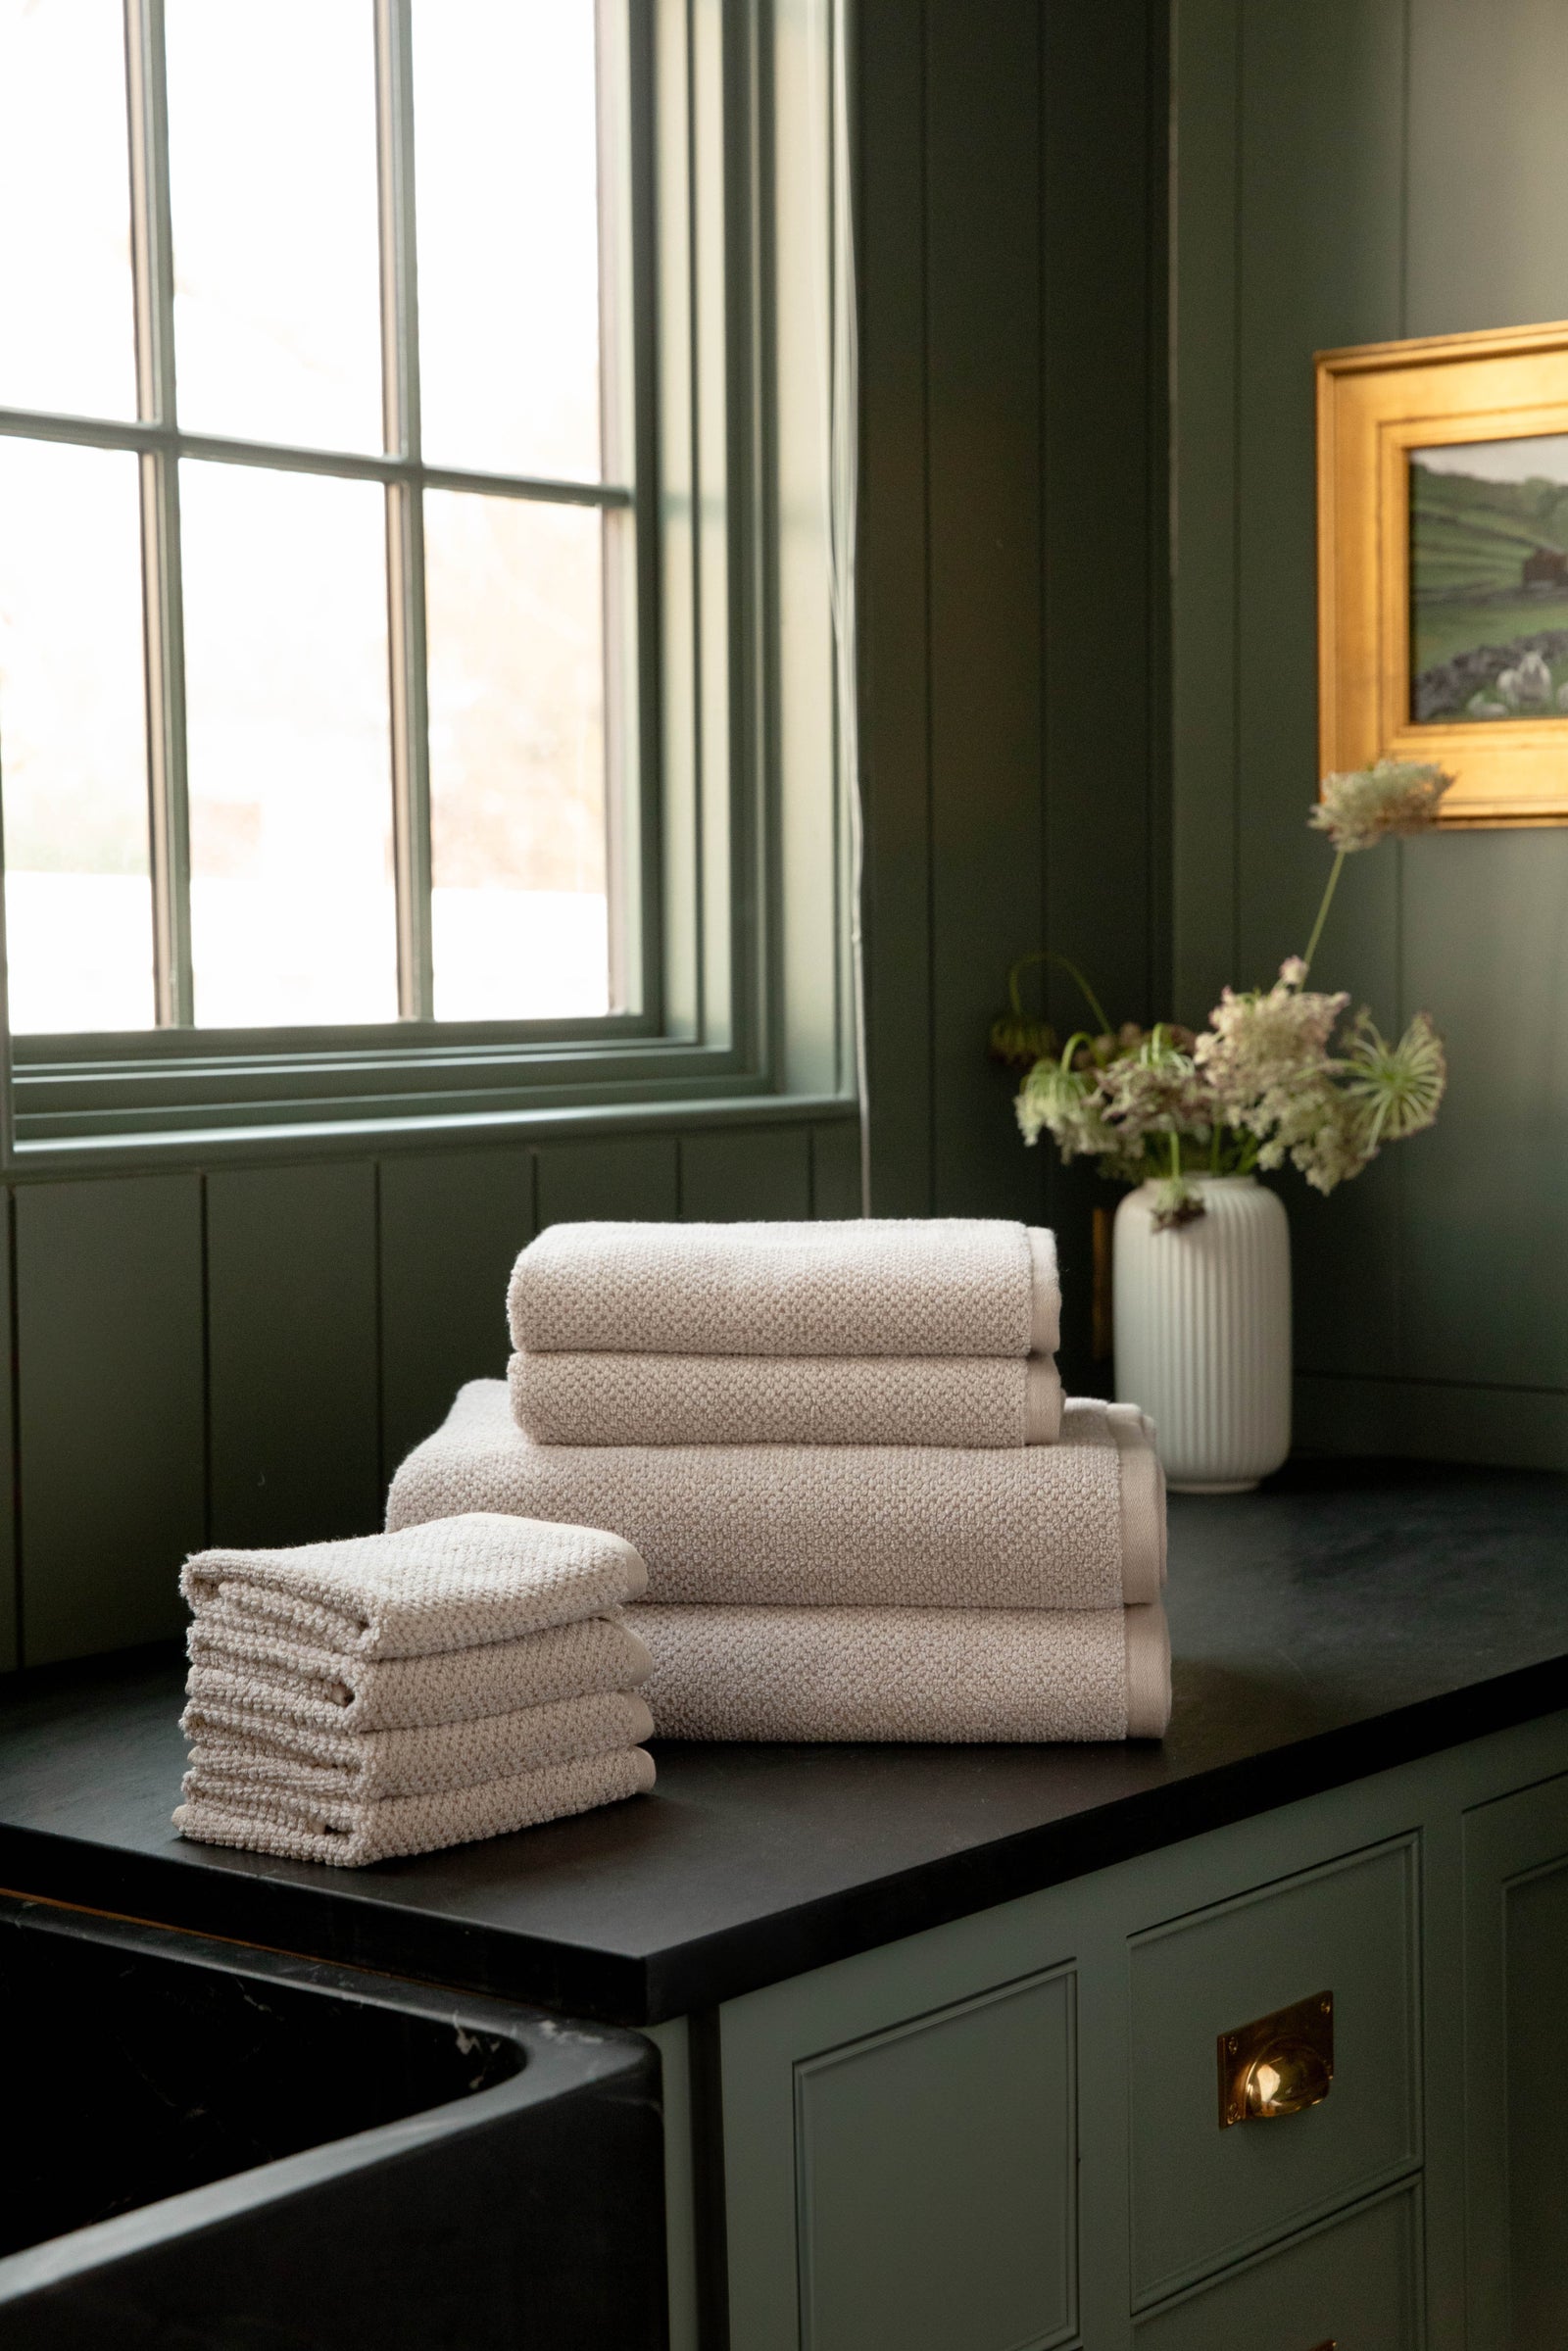 Nantucket Bath Towel Set in the color Heathered Sand. Photo of Nantucket Bath Towel Set taken with the Heathered Sand Bundle resting on a bathroom countertop. 